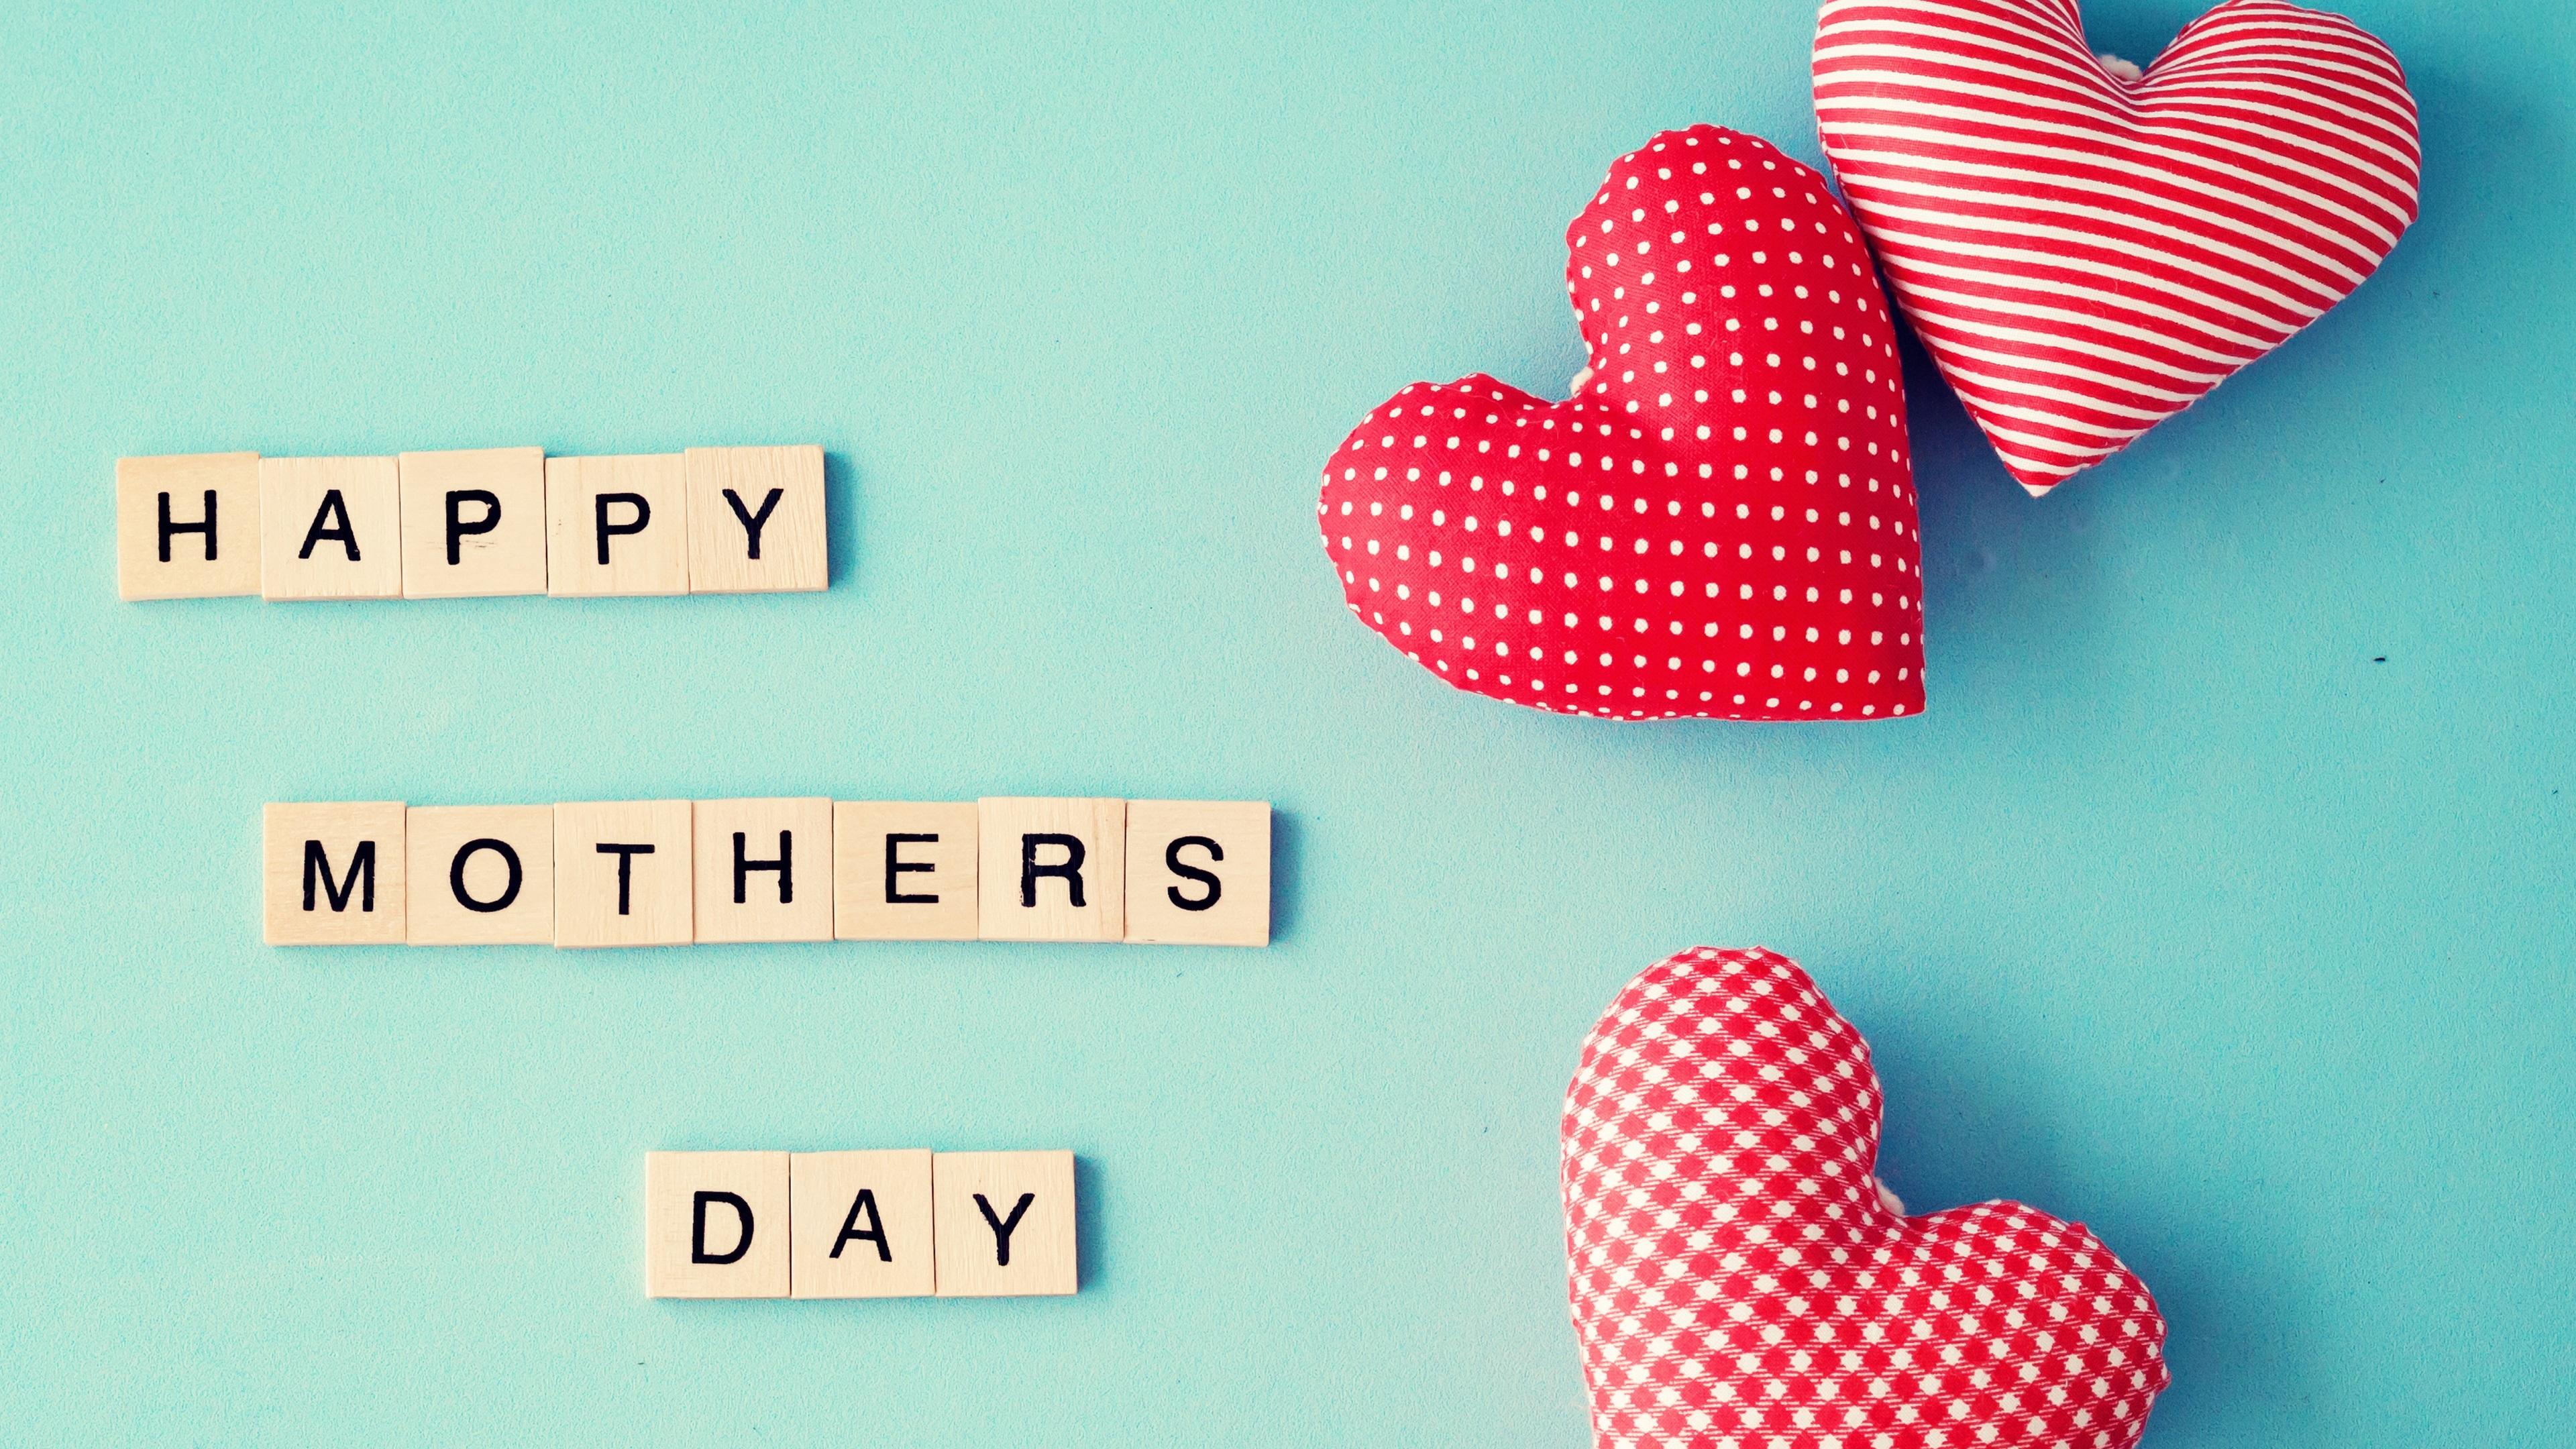 Wallpaper Happy Mothers Day, love hearts 3840x2160 UHD 4K Picture, Image